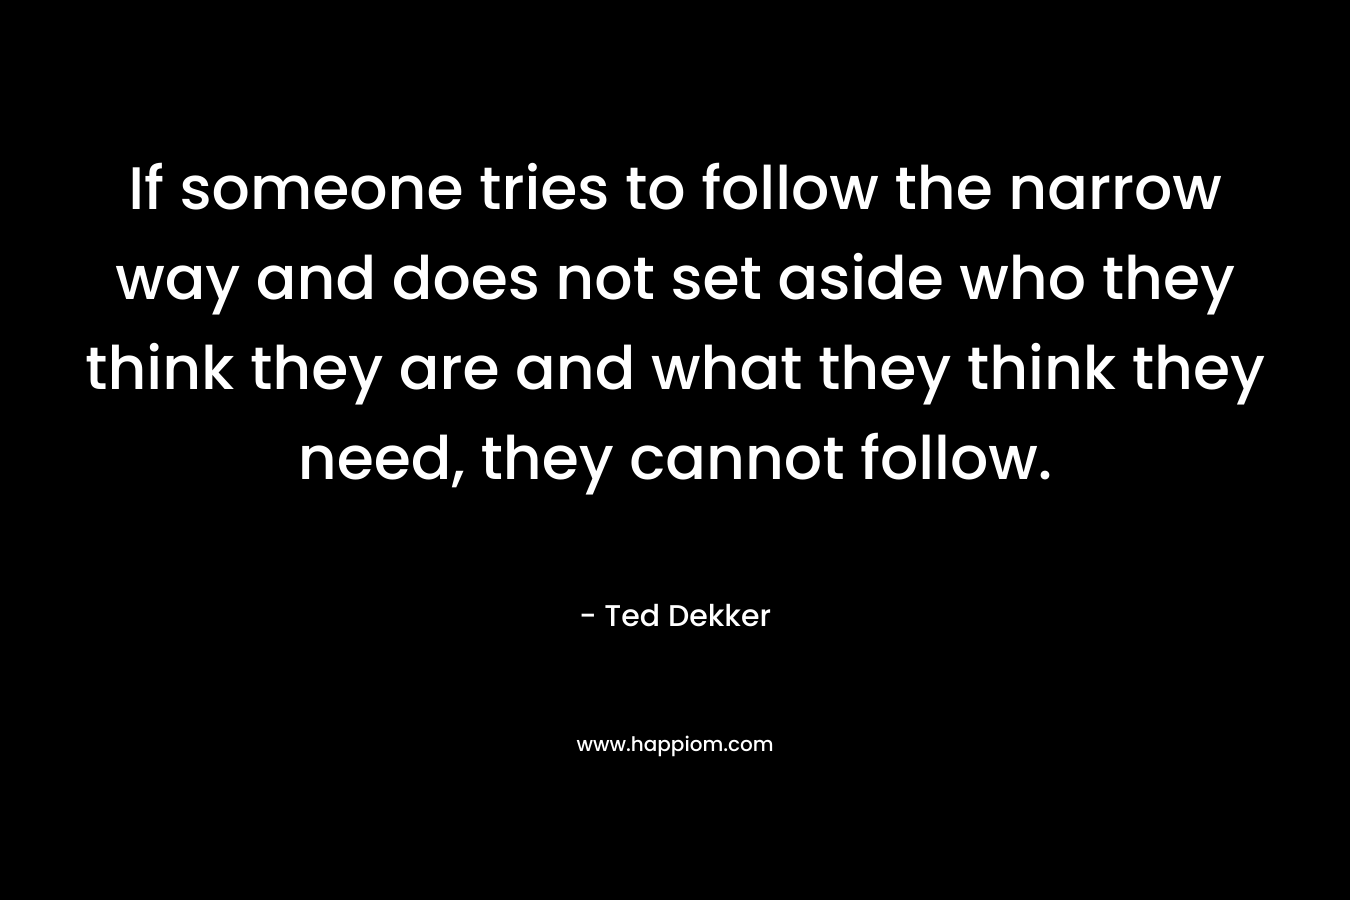 If someone tries to follow the narrow way and does not set aside who they think they are and what they think they need, they cannot follow. – Ted Dekker